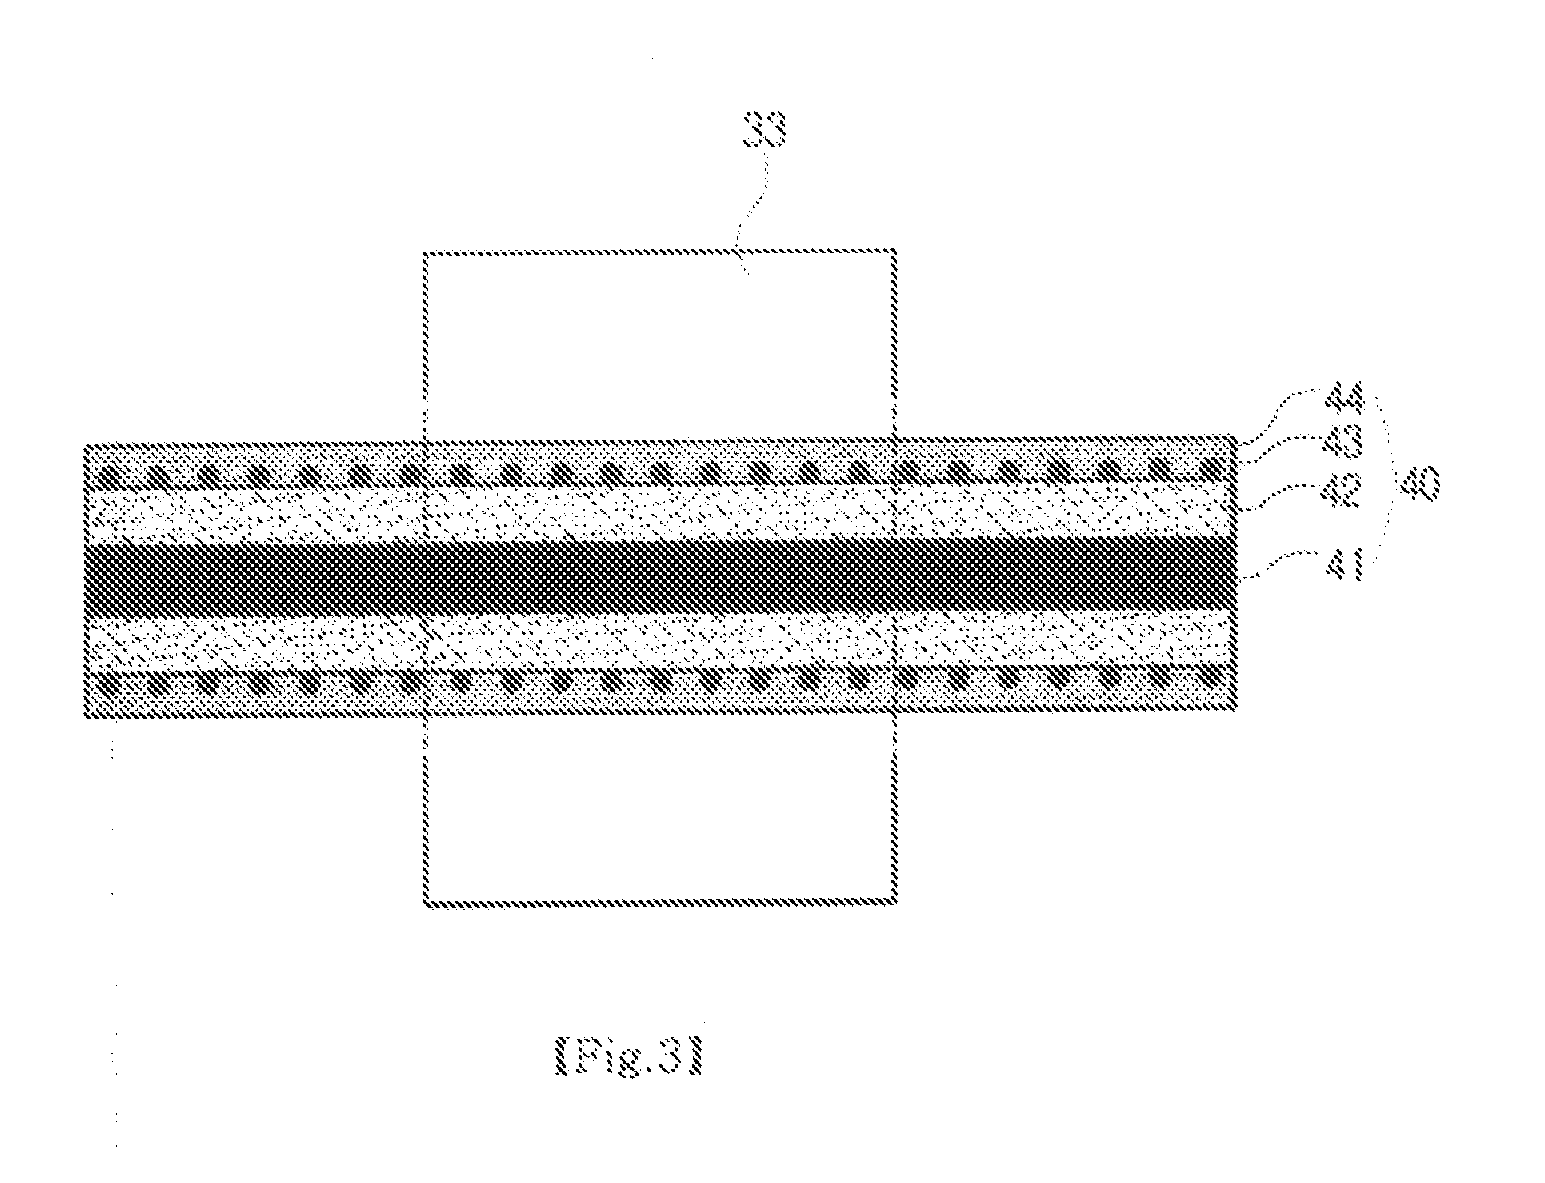 Nonvolatile memory electronic device including nanowire channel and nanoparticle-floating gate nodes and a method for fabricating the same